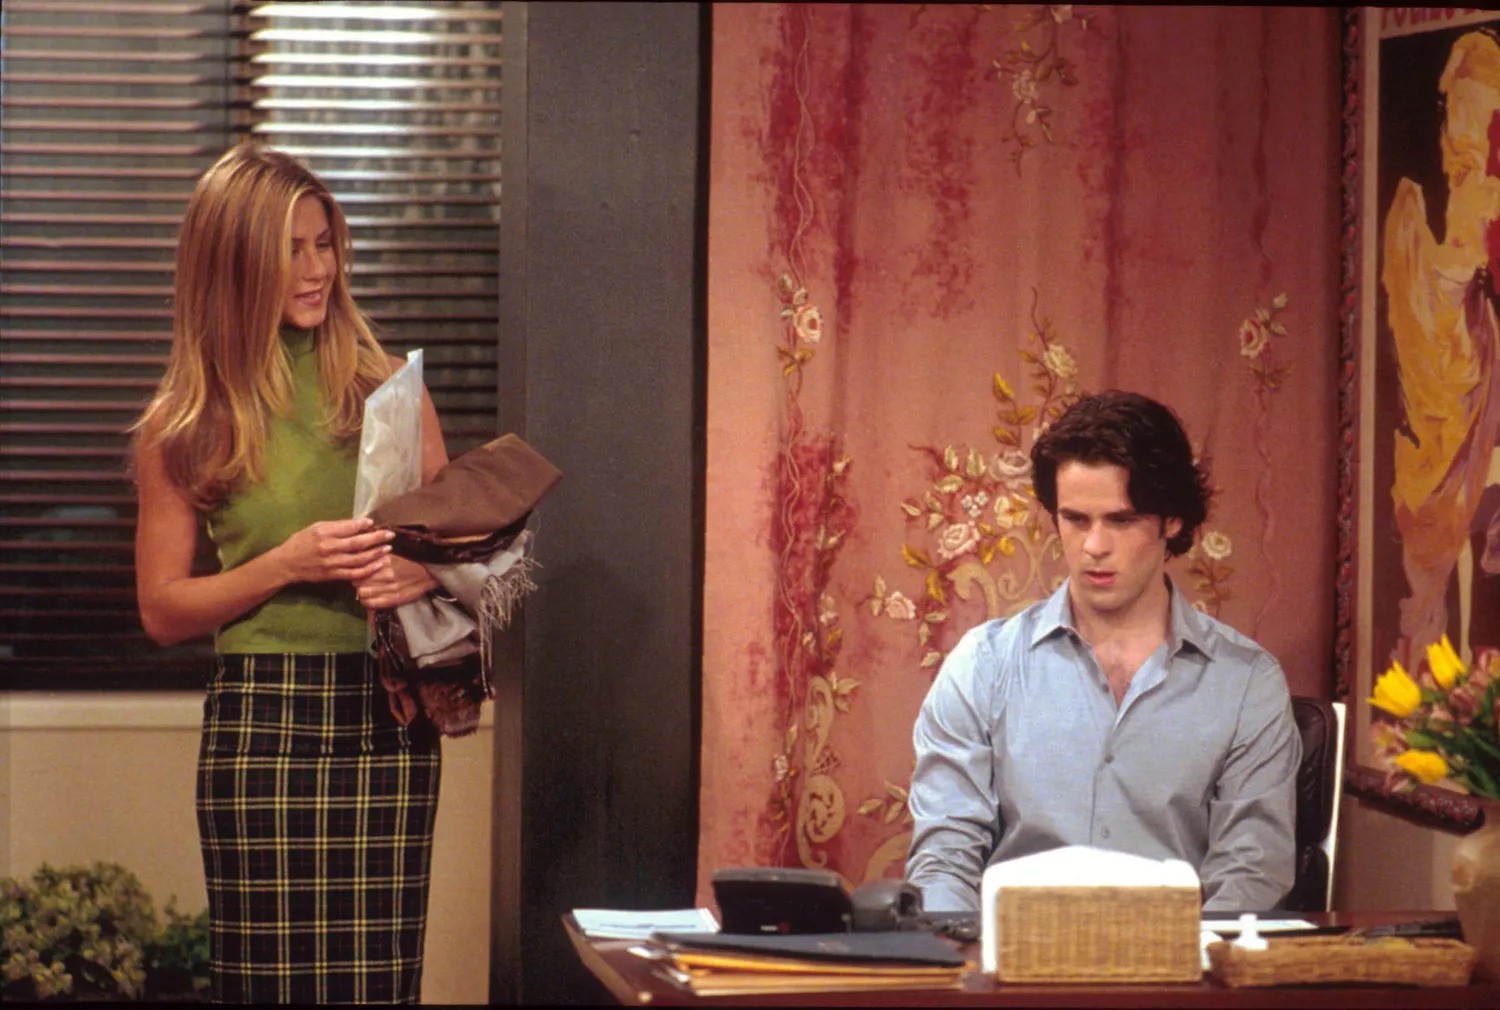 Rachel Green in a green top and a plaid skirt